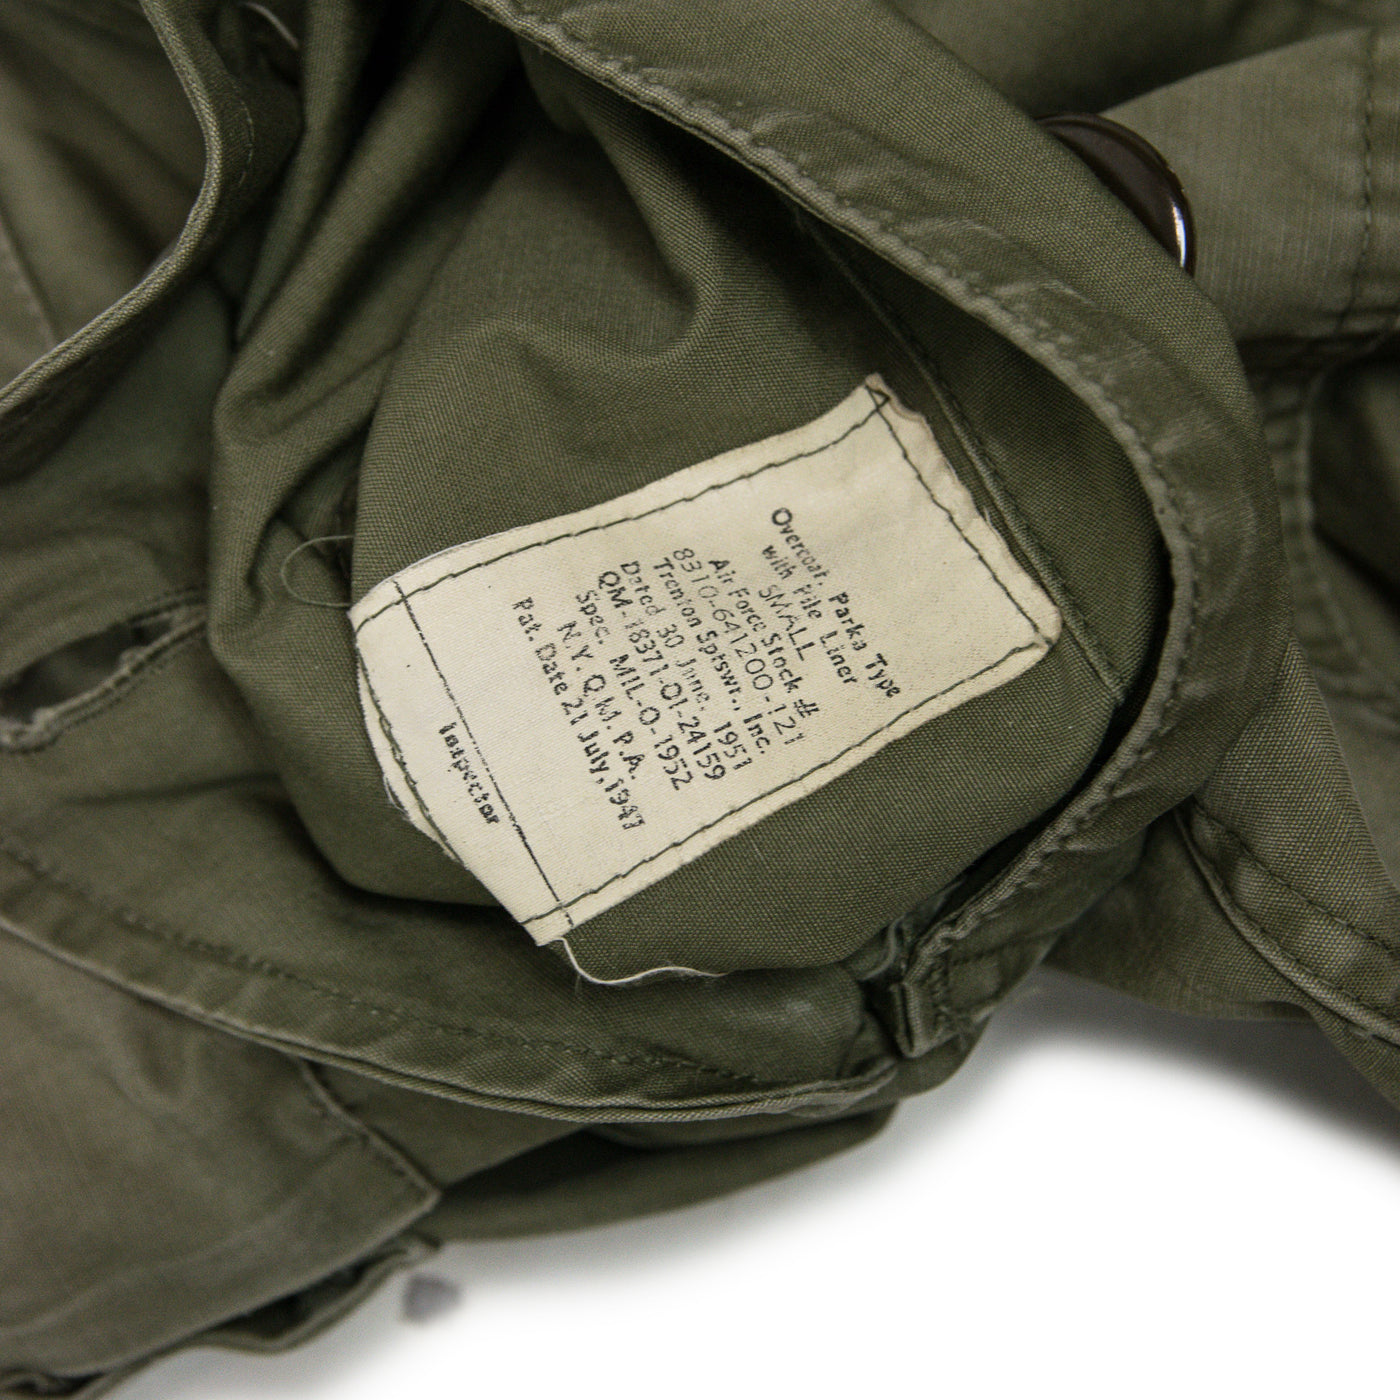 Vintage M-47 50s US Army Extreme Cold Weather Parka Jacket Overcoat S internal label